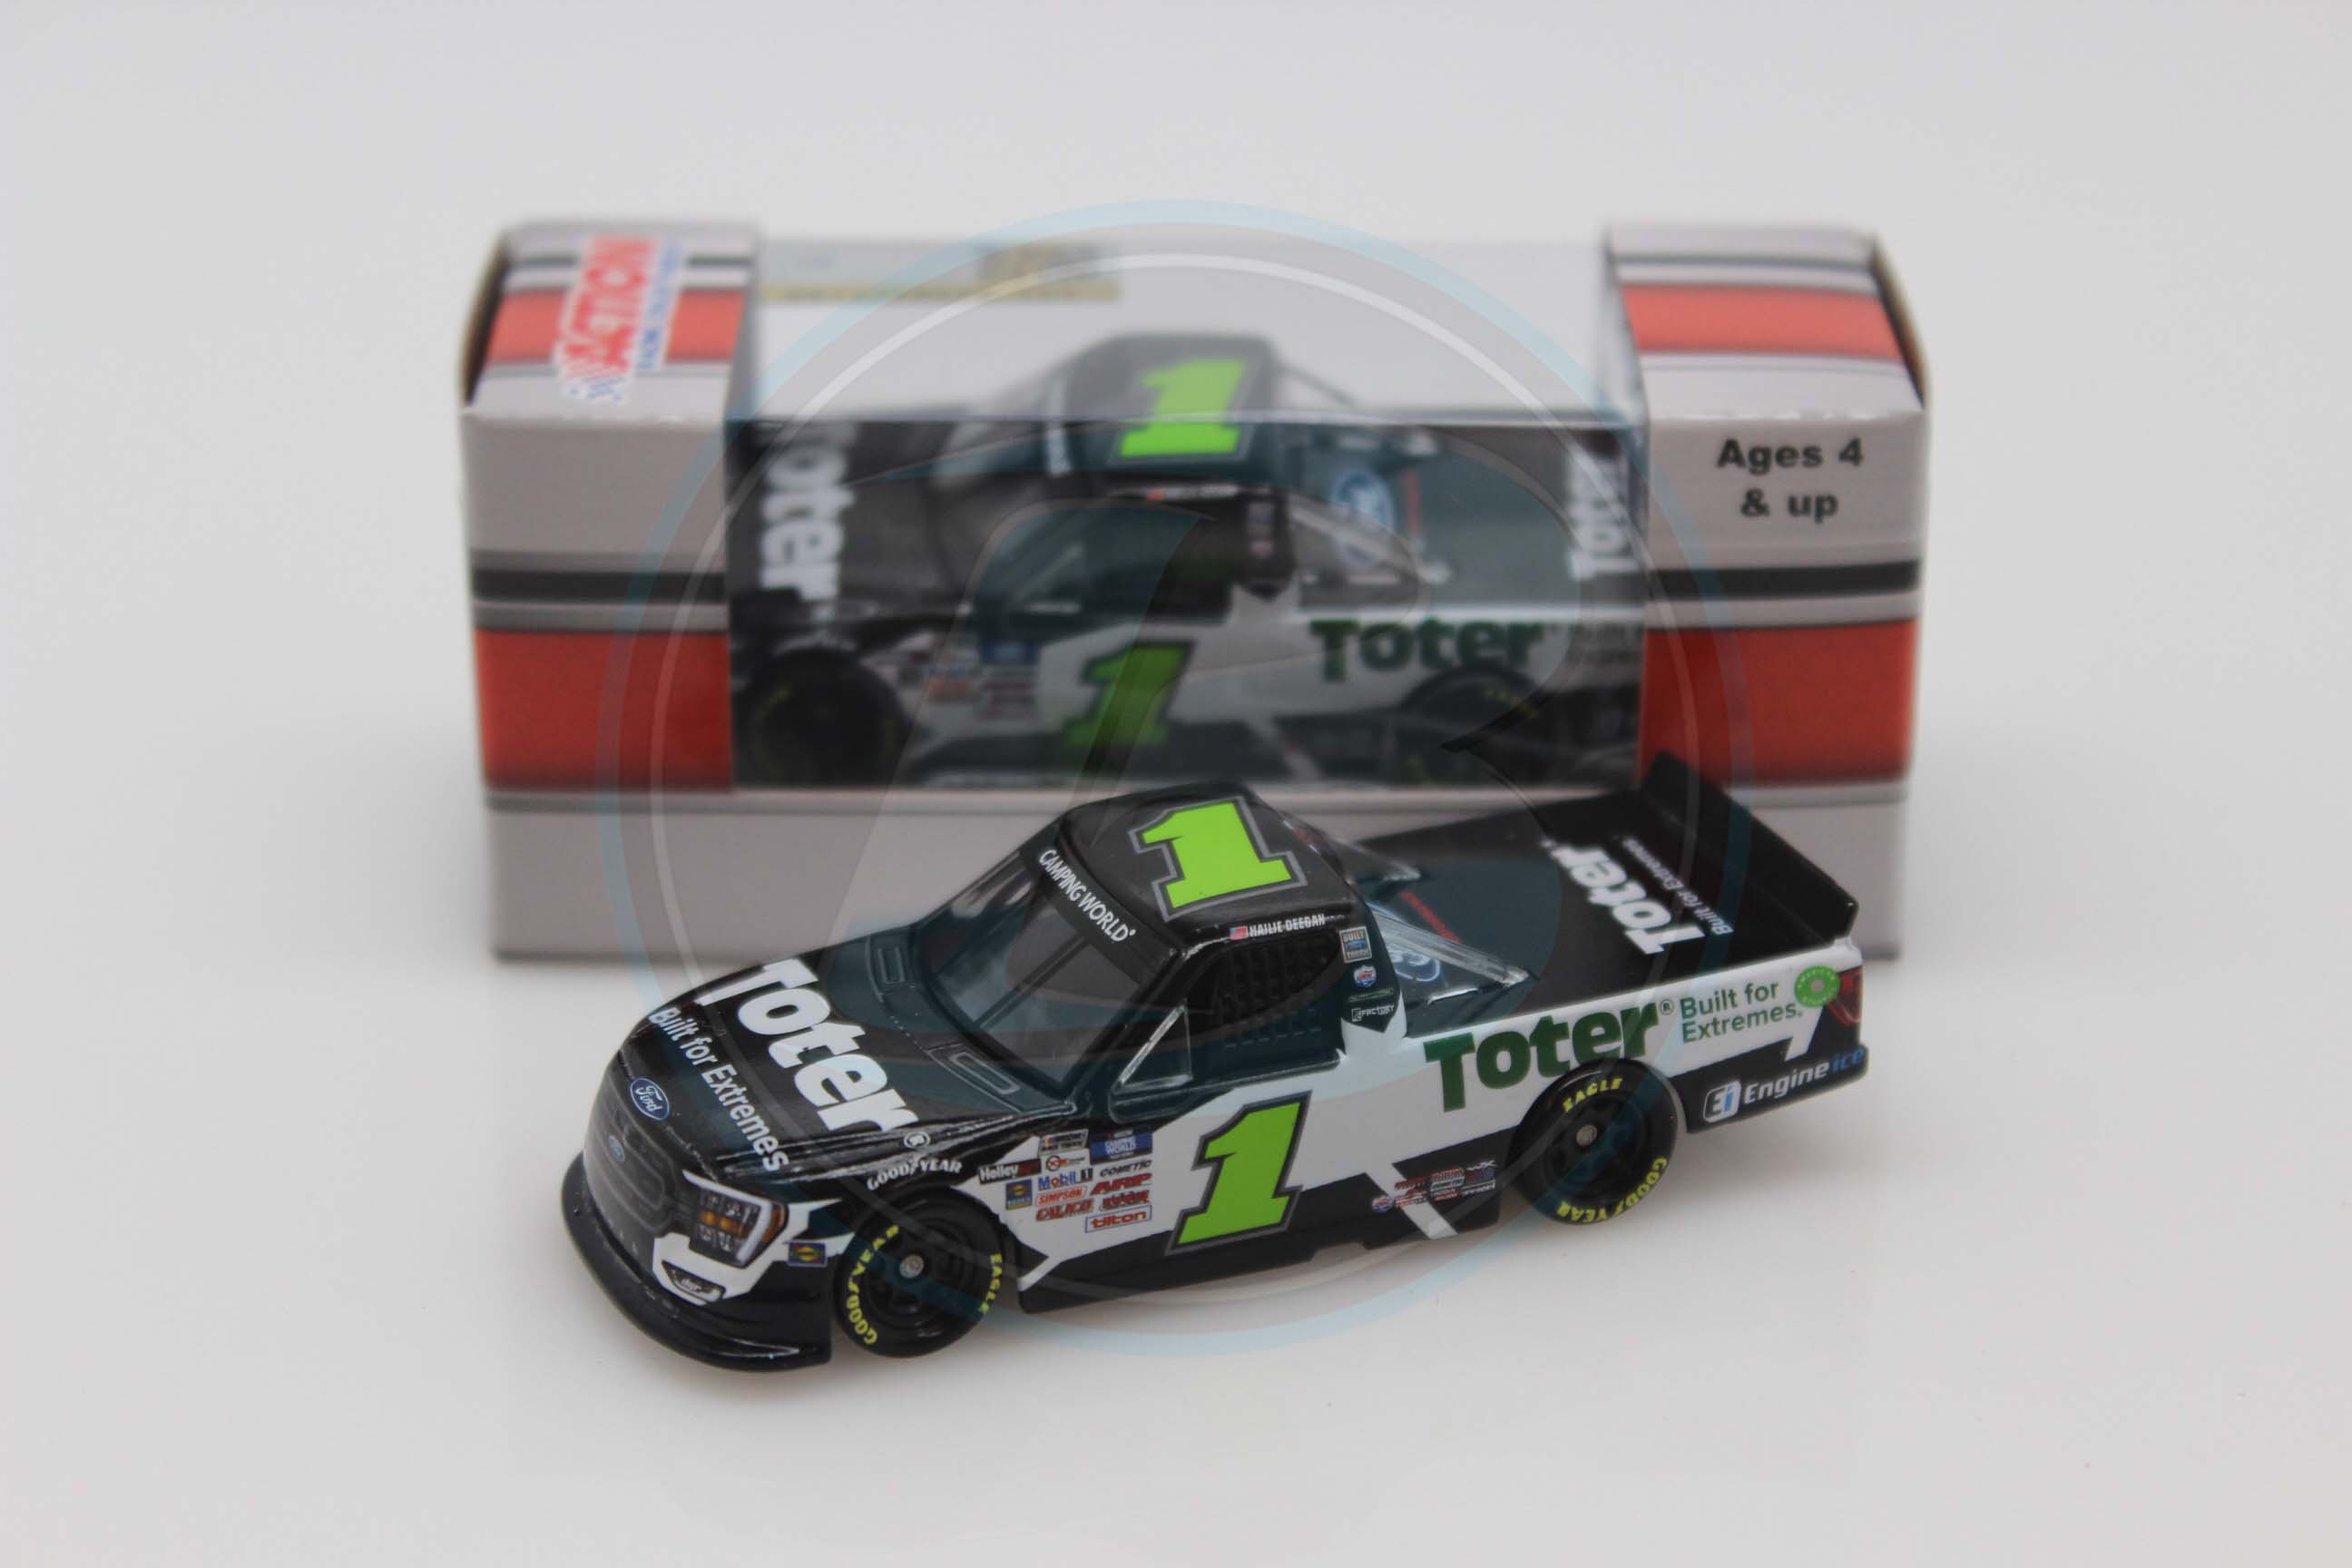 2020 Hailie Deegan Toter Hauler and Arca Ford 1 64 Diecast NASCAR Authentics 4 for sale online 